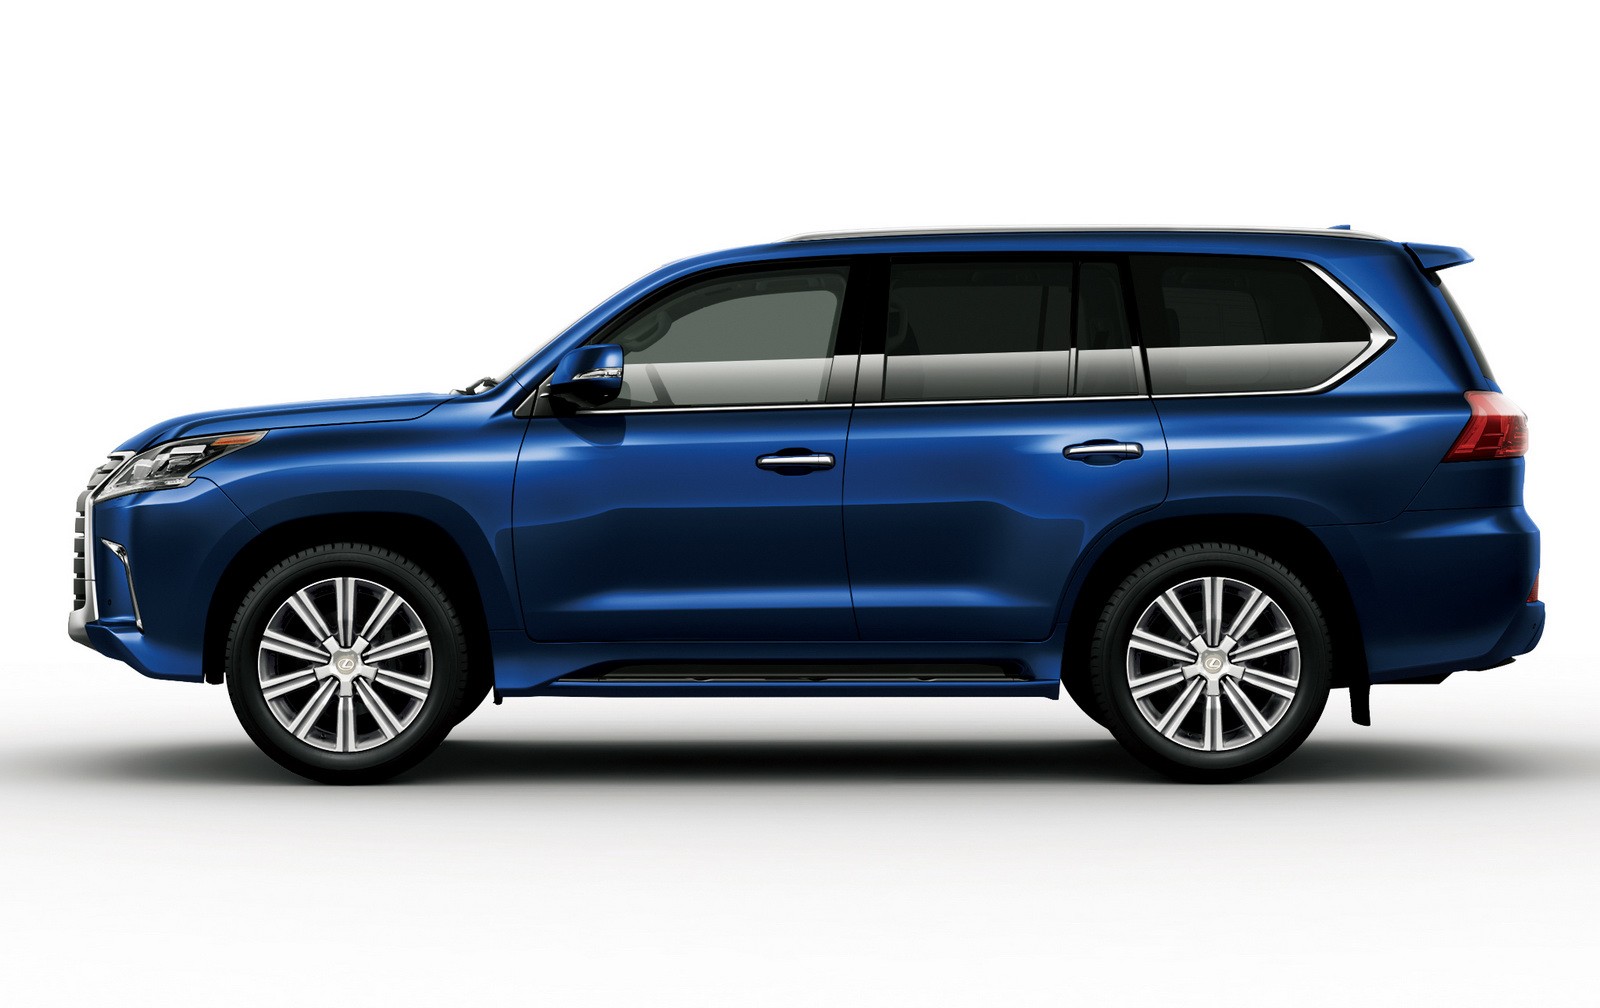 Lexus LX 570 Is Now Available in Japan, Has Sequential LED Turn Signals